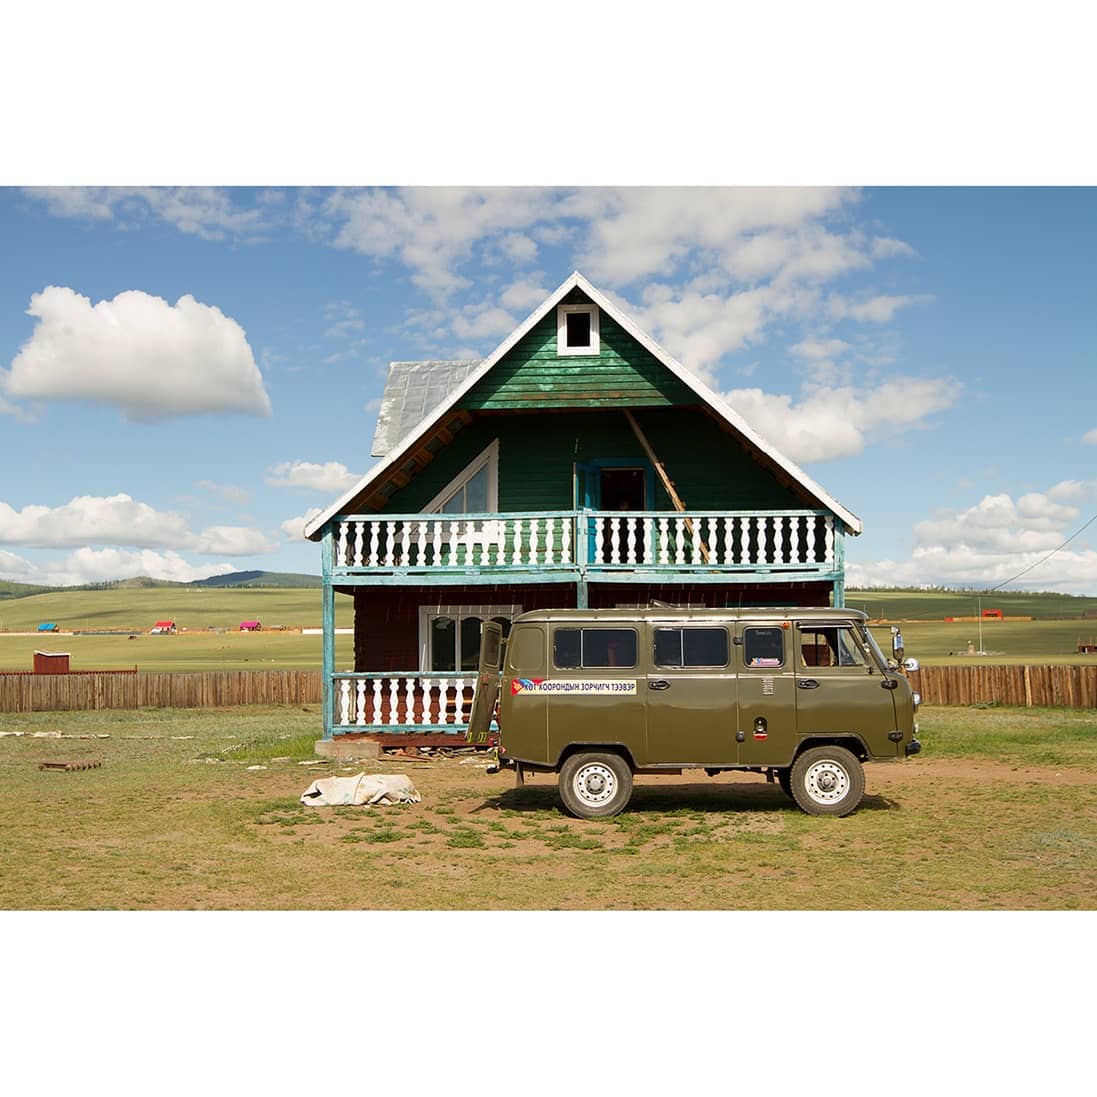 A UAZ van parked outside an inn. Made in Russia, the UAZ van is ubiquitous in the Mongolian country side. It's not especially comfortable but it can handle the lack of paved roads and crossing rivers and streams.